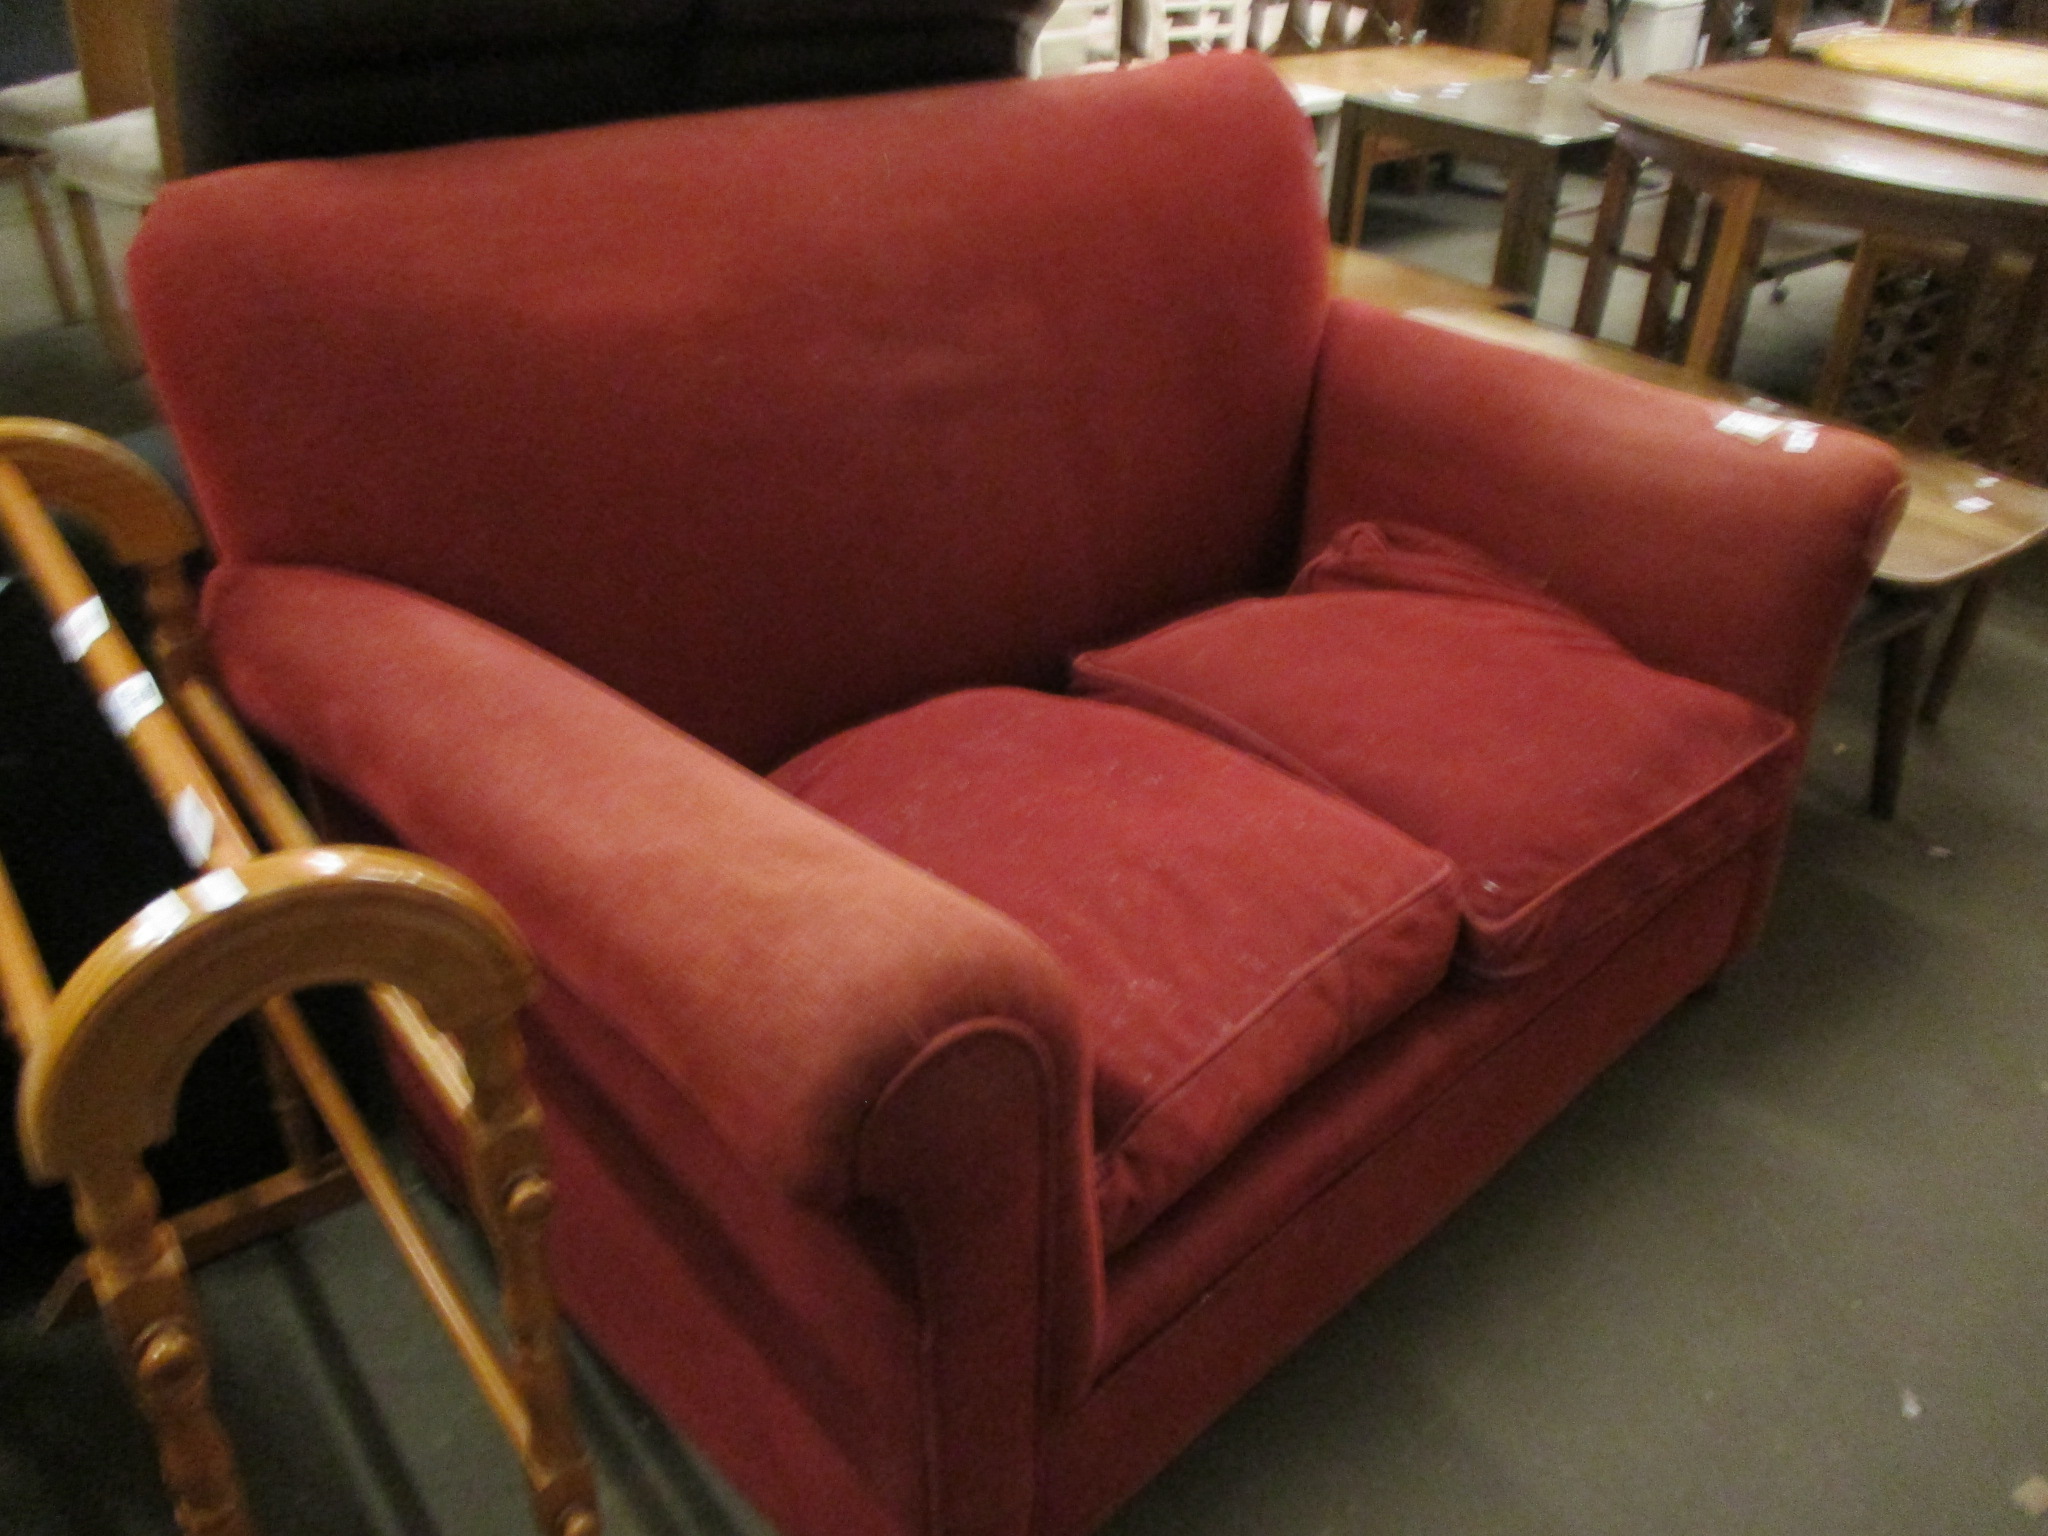 TWO-SEATER SOFA